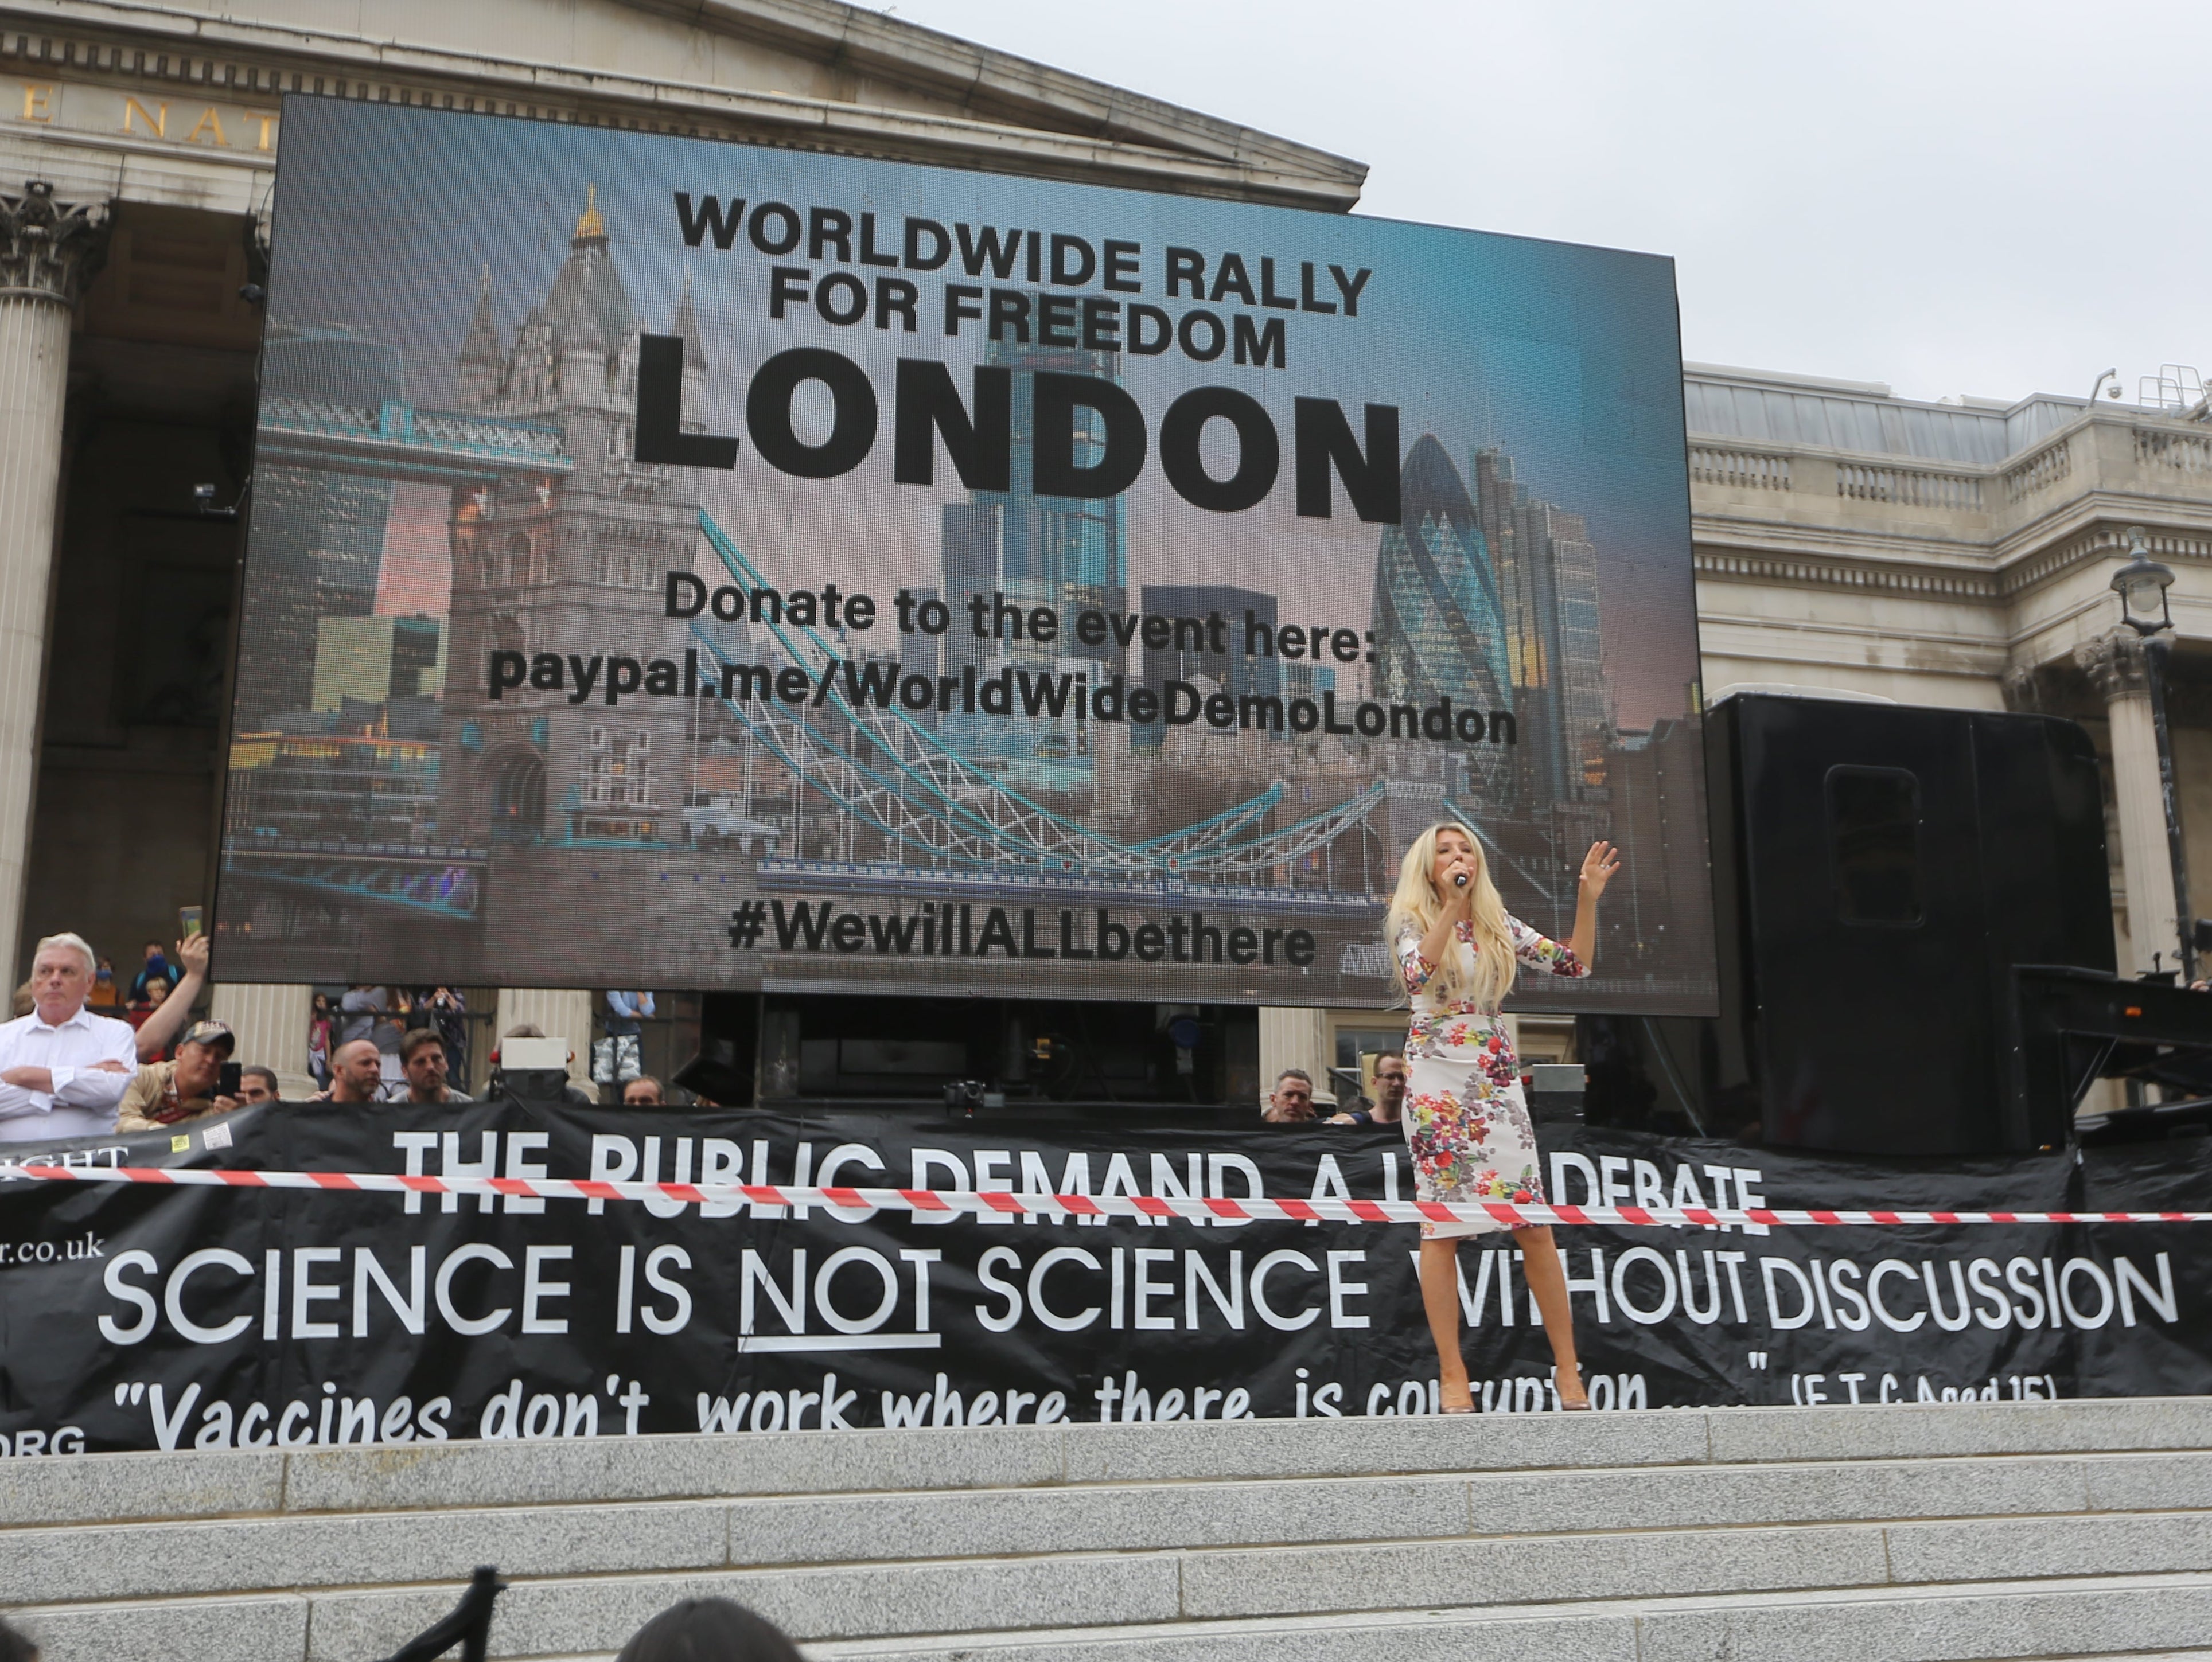 Kate Shemirani speaking at an anti-vaxx protest in London on 24 July 2021